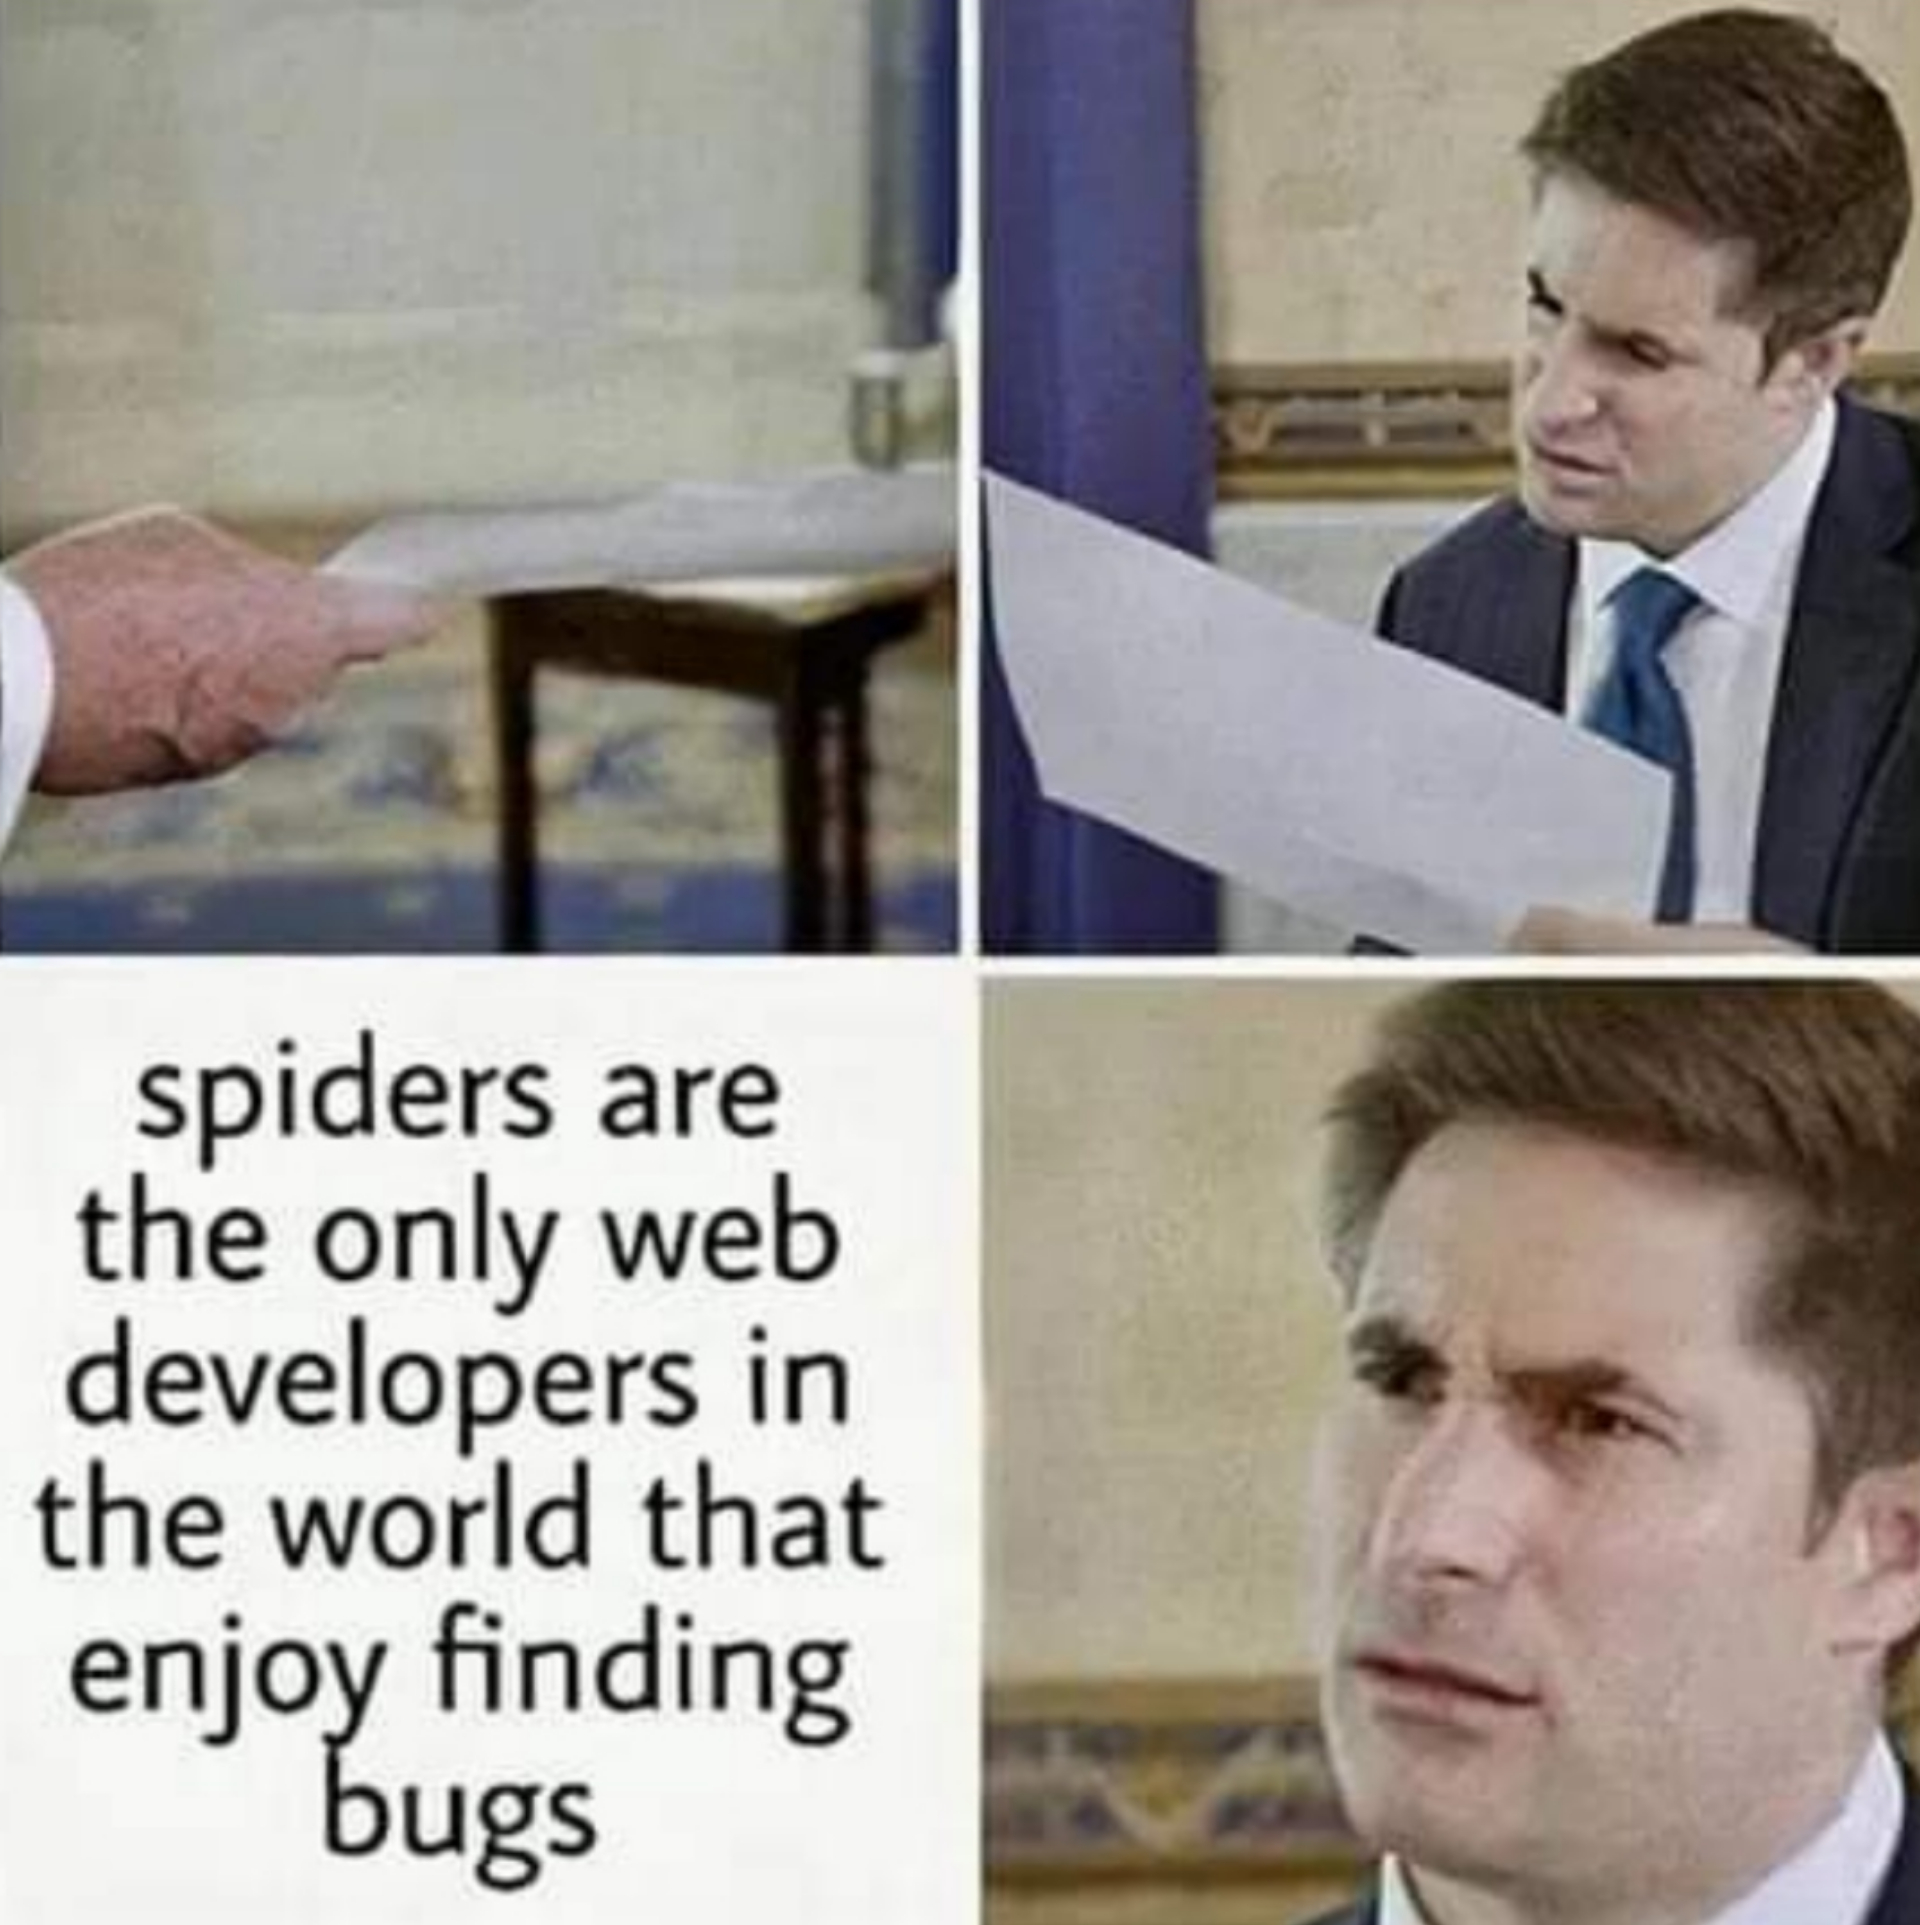 funny memes - dank memes - can squirrels survive terminal velocity - spiders are the only web developers in the world that enjoy finding bugs